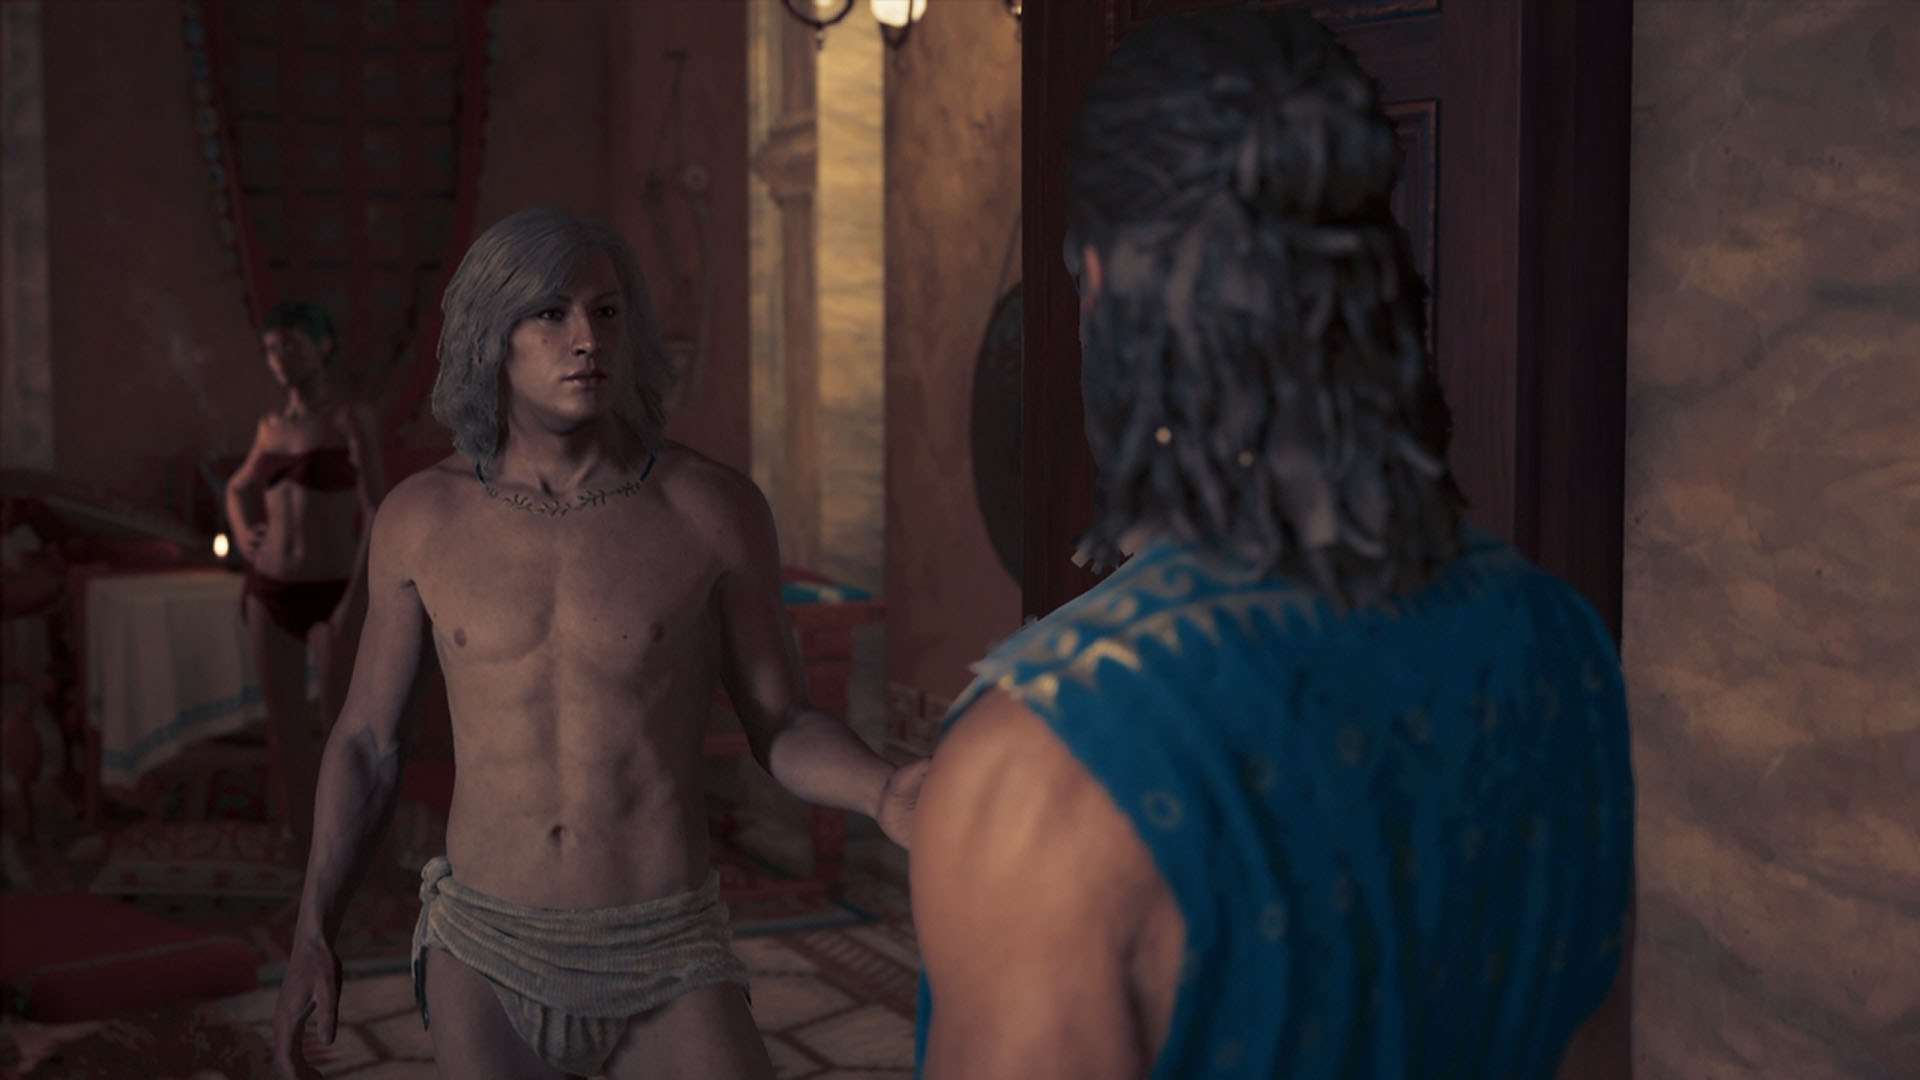 Assassin's creed odyssey gay